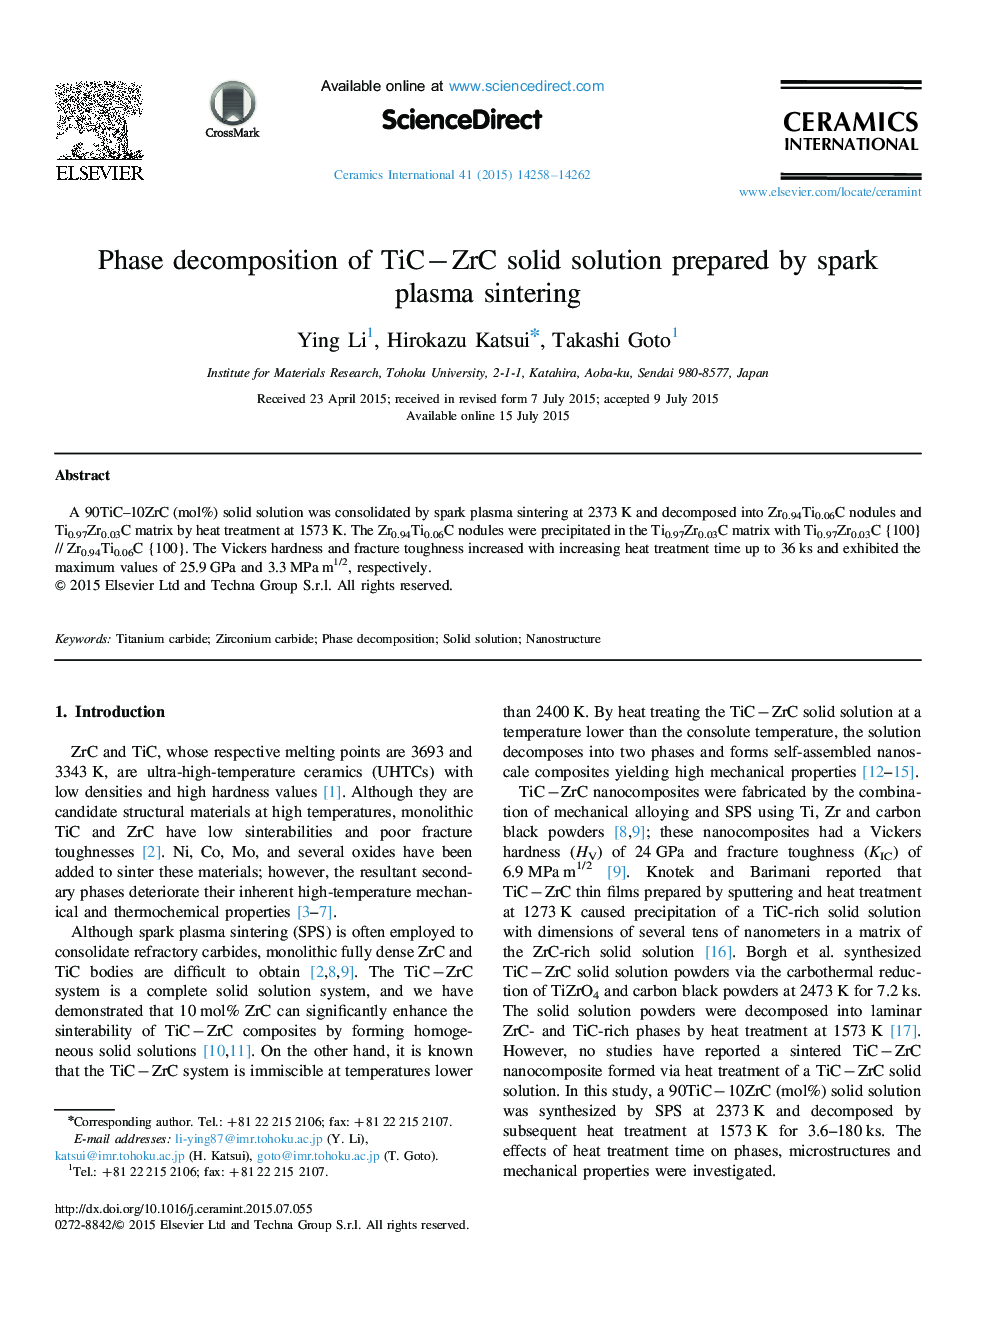 Phase decomposition of TiC−ZrC solid solution prepared by spark plasma sintering